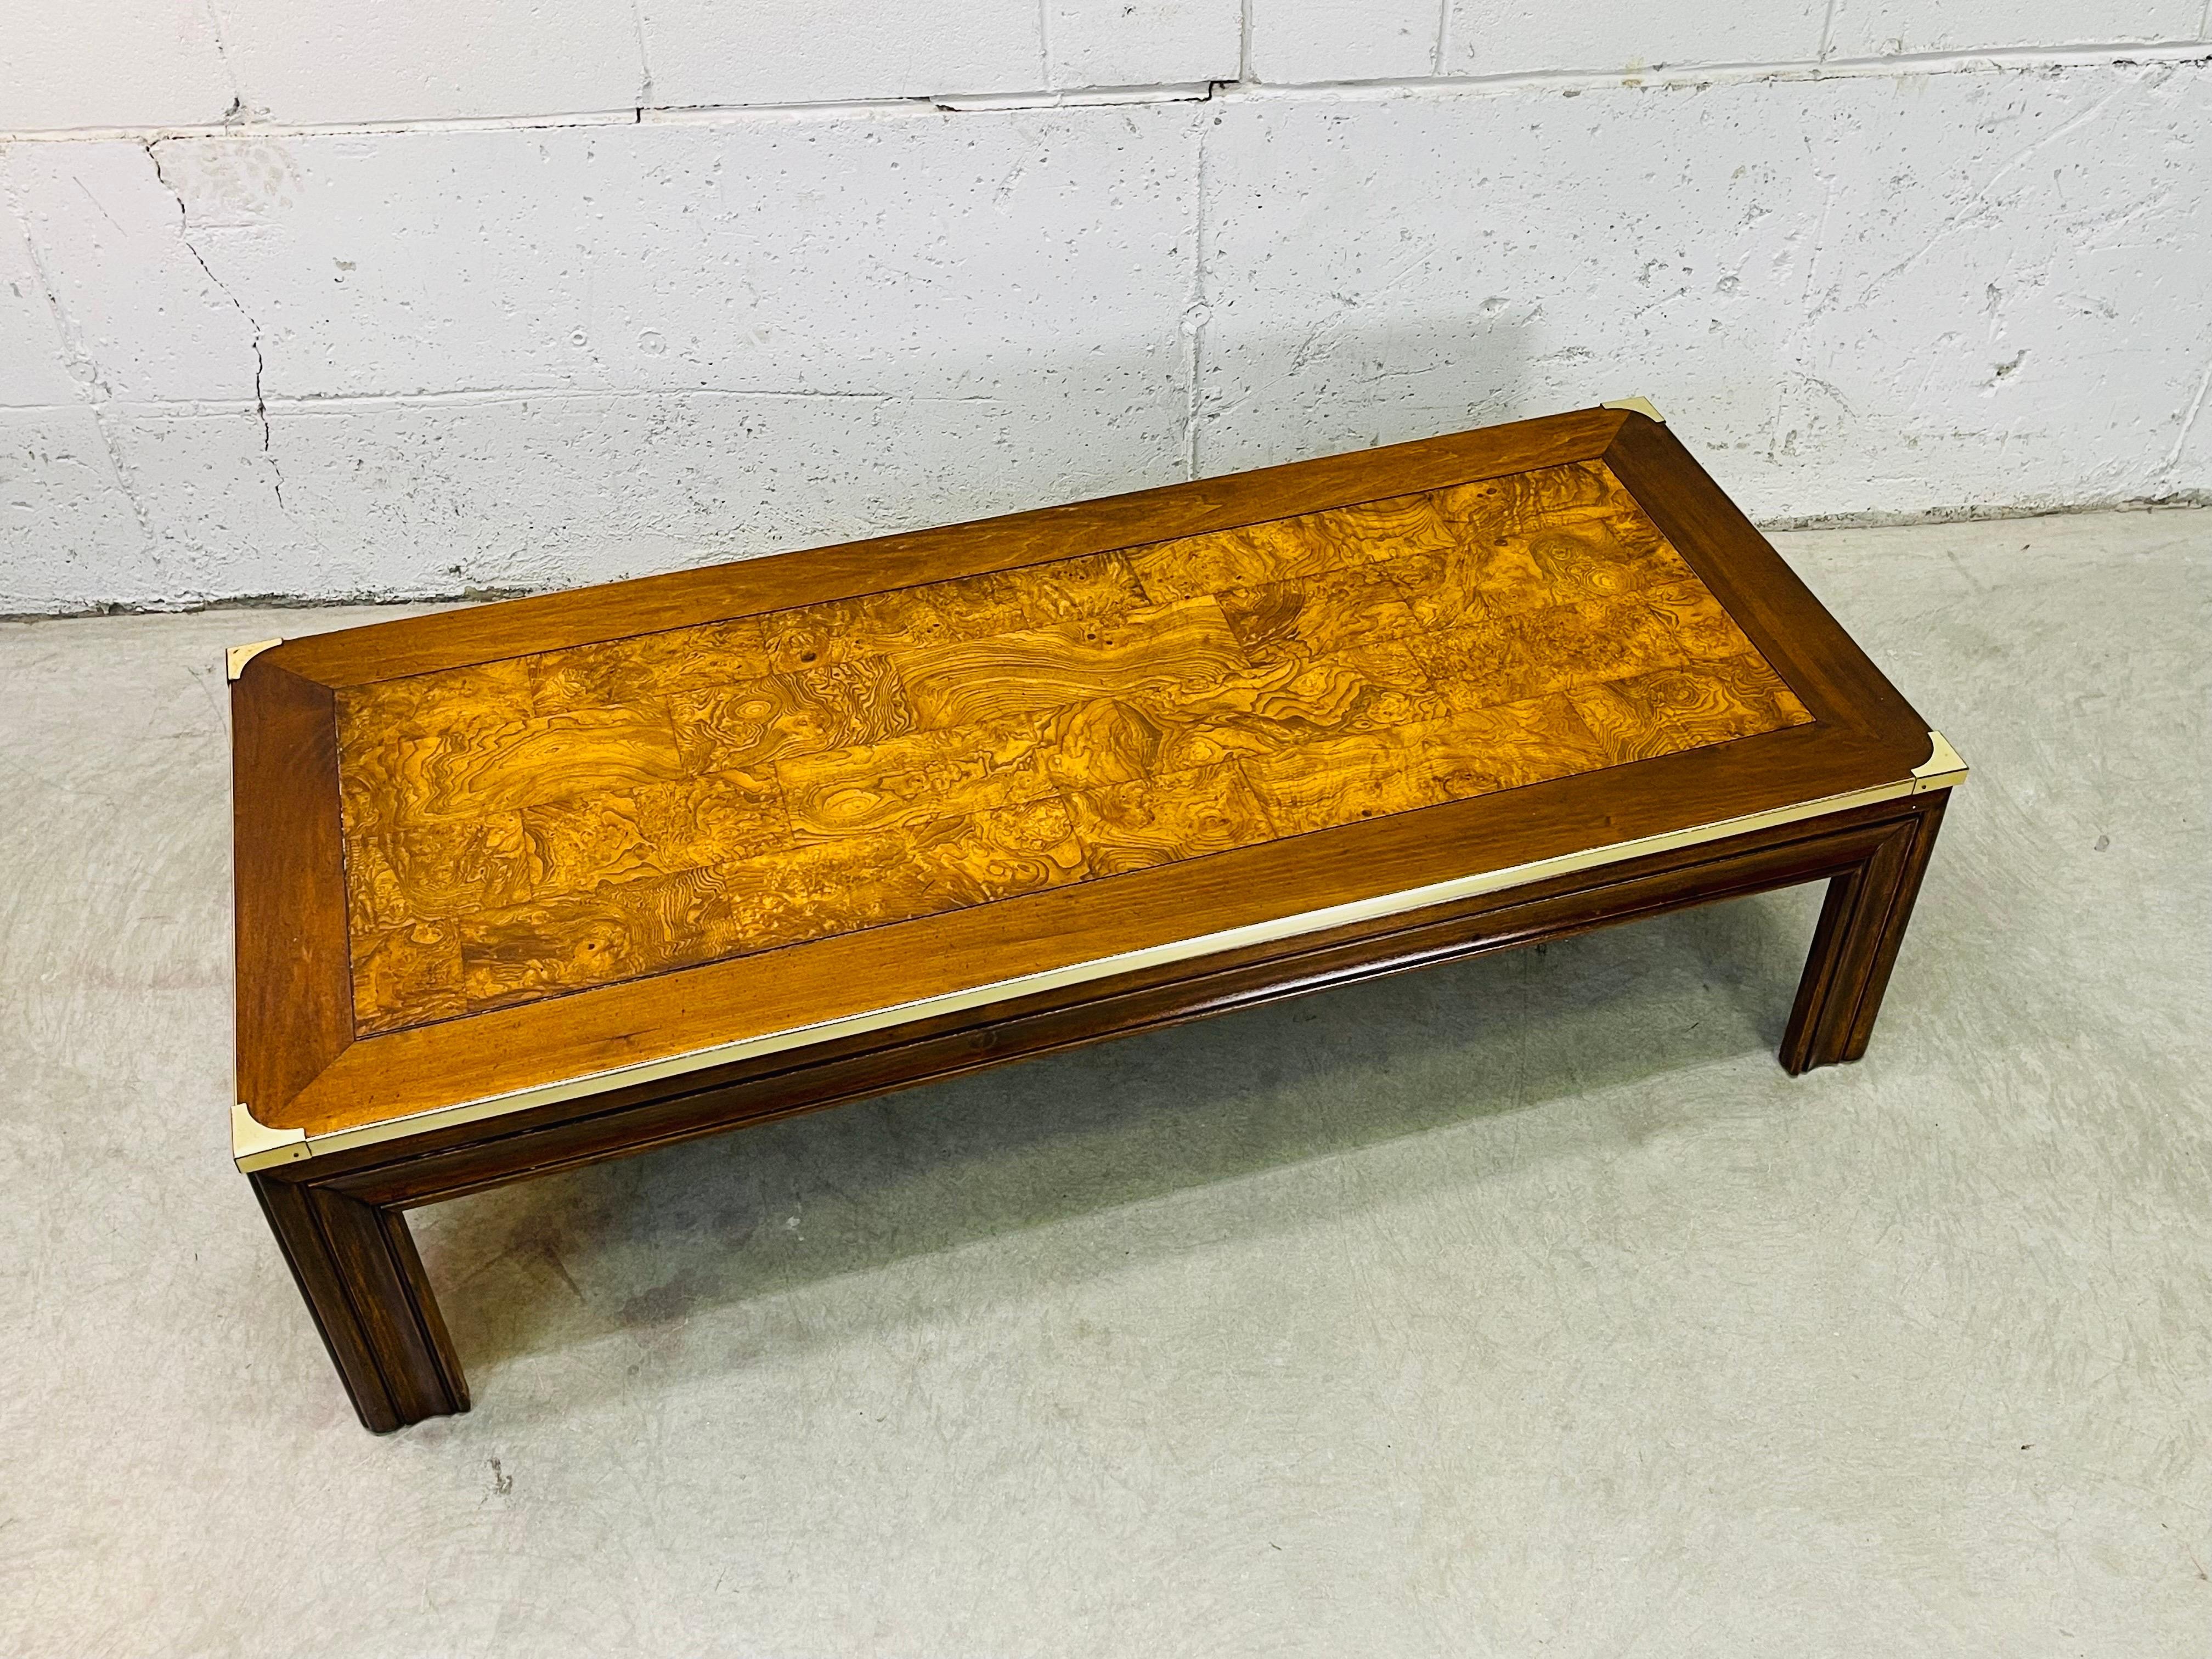 Vintage 1970s rectangular burlwood top coffee table with brass accented sides. Coffee table has large wood legs that make the table very sturdy. The burlwood is inset into the top of the table. No marks.